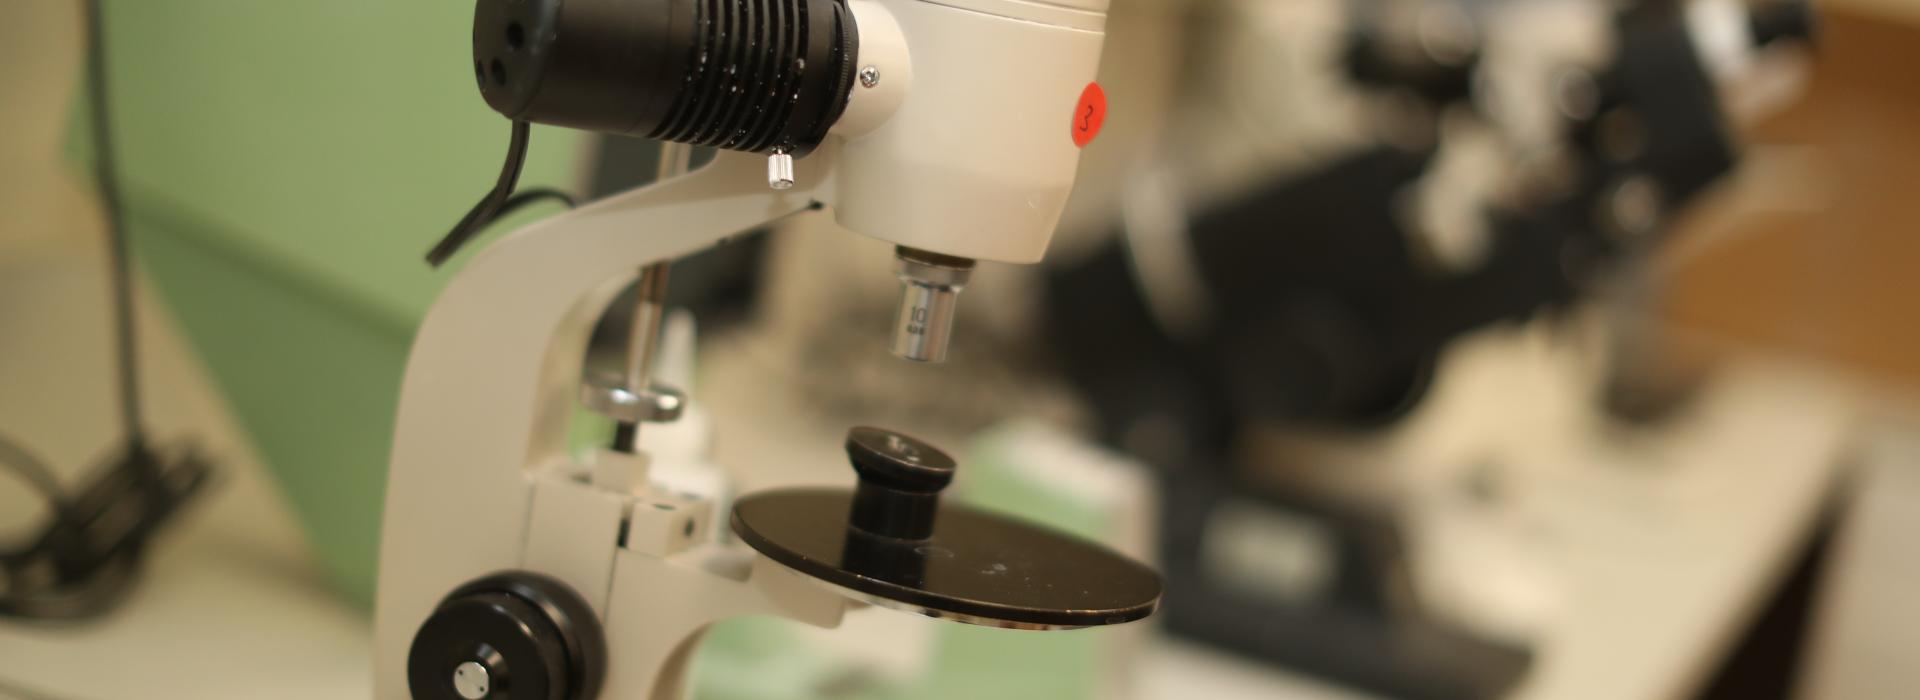 Closeup of microscopes in clinical optometry lab